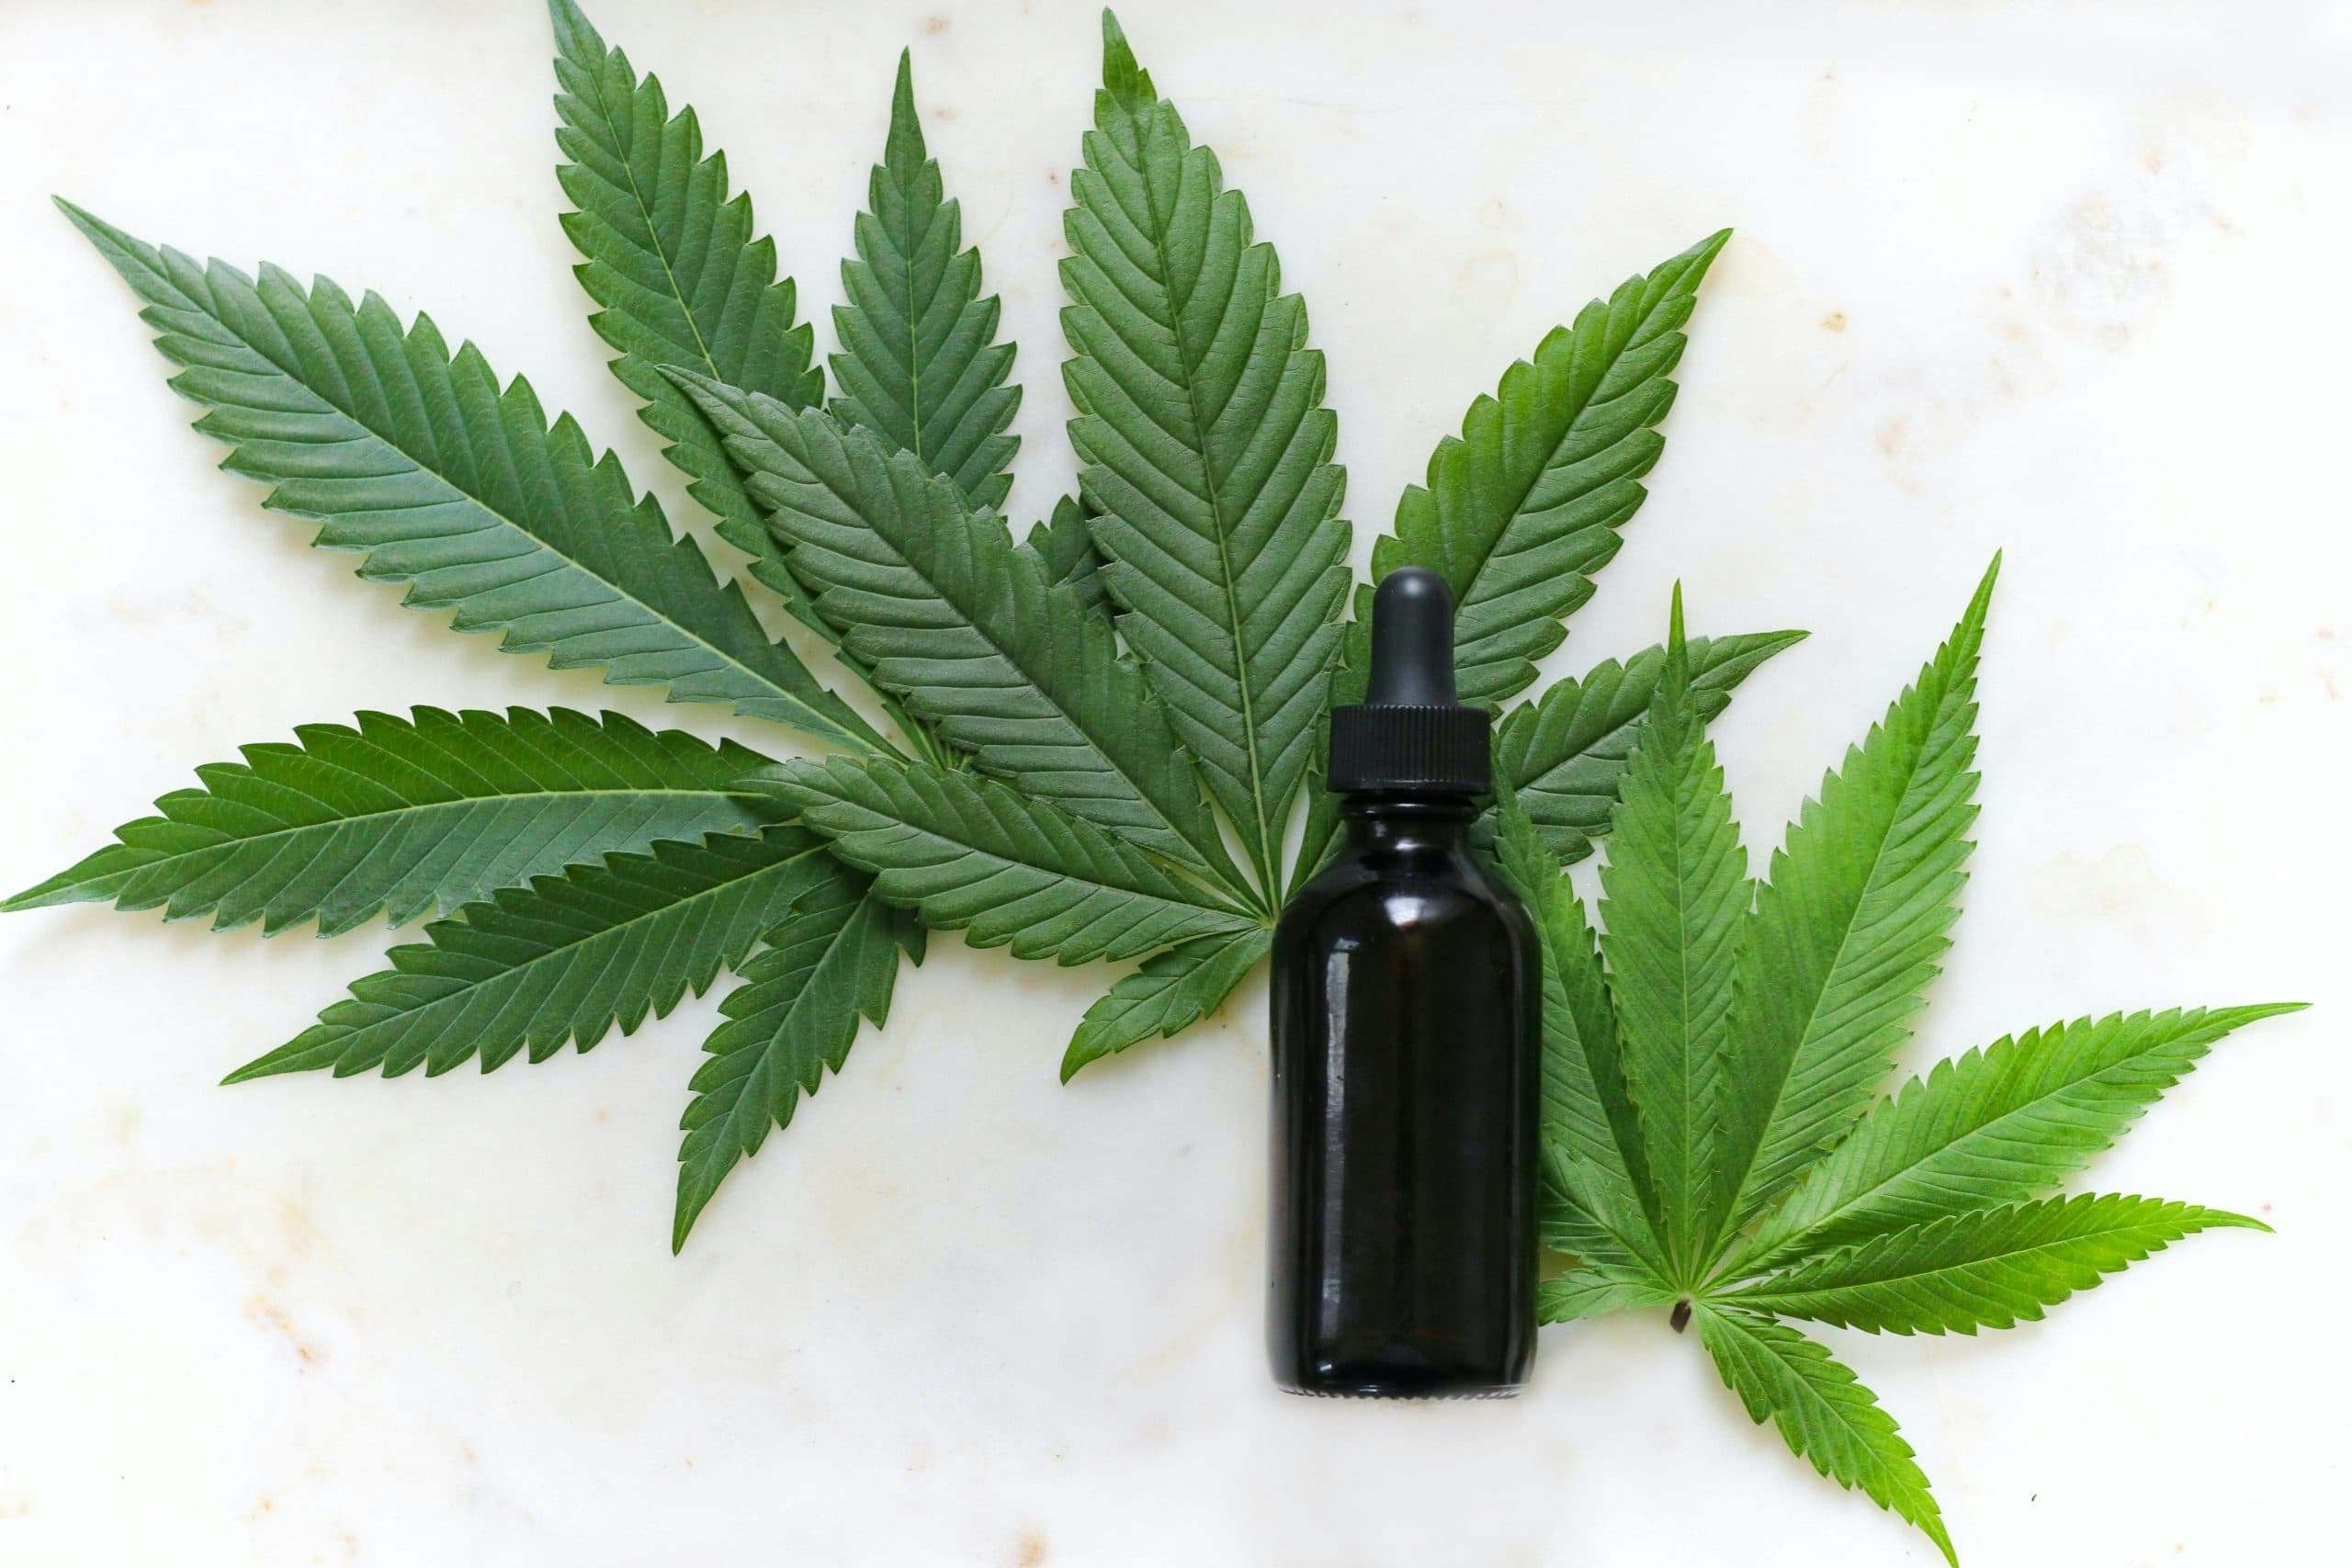 Which type of CBD oil could you make?